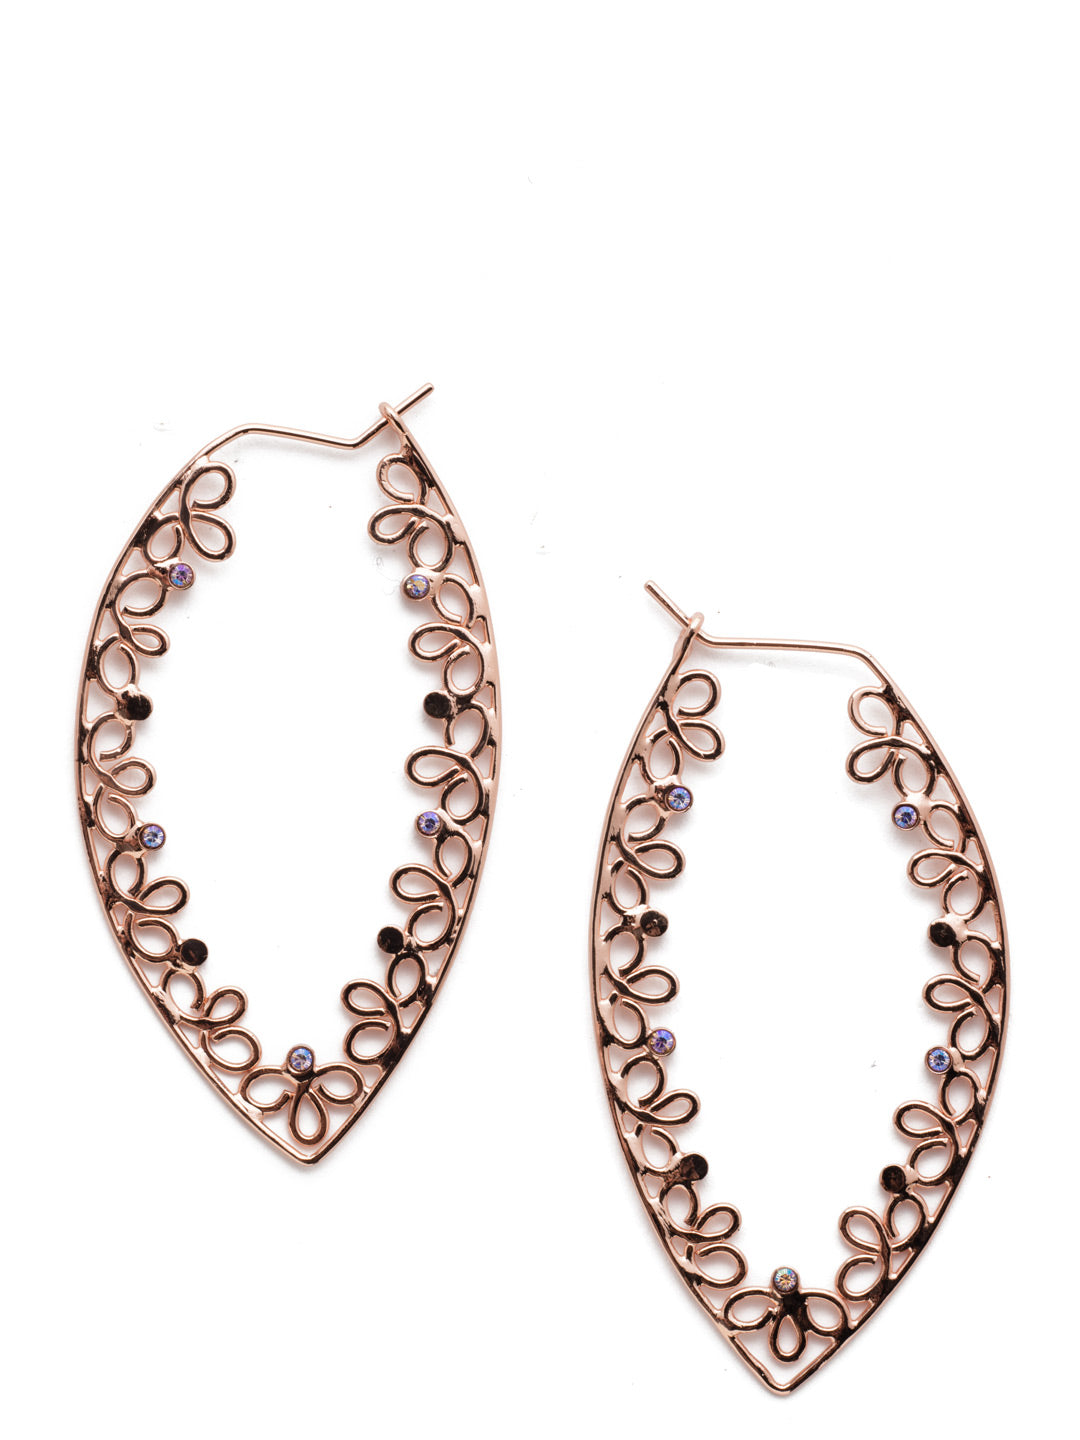 Marilyn Hoop Earrings - EES140RGLVP - <p>Slip them on and you're sure to make a statement in our Marilyn Statement Hoop Earrings. Detailed, delicate hand-soldered metalwork lines their unique teardrop shape accented with dots of sparkling crystals. From Sorrelli's Lavender Peach collection in our Rose Gold-tone finish.</p>